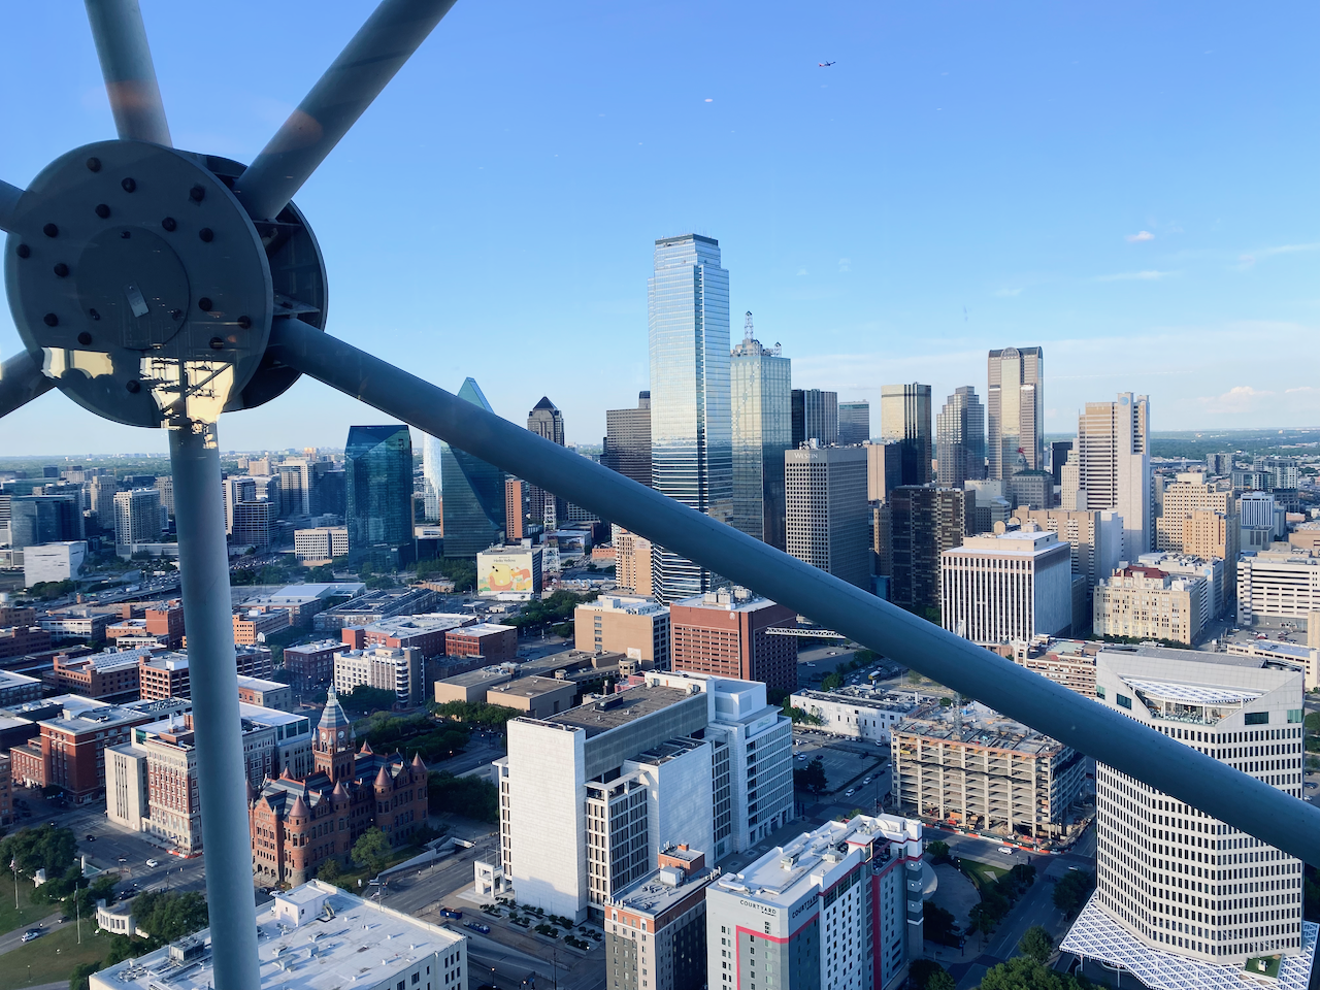 The restaurant atop Reunion Tower, Crown Block, has quite the views, but doesn't spin.